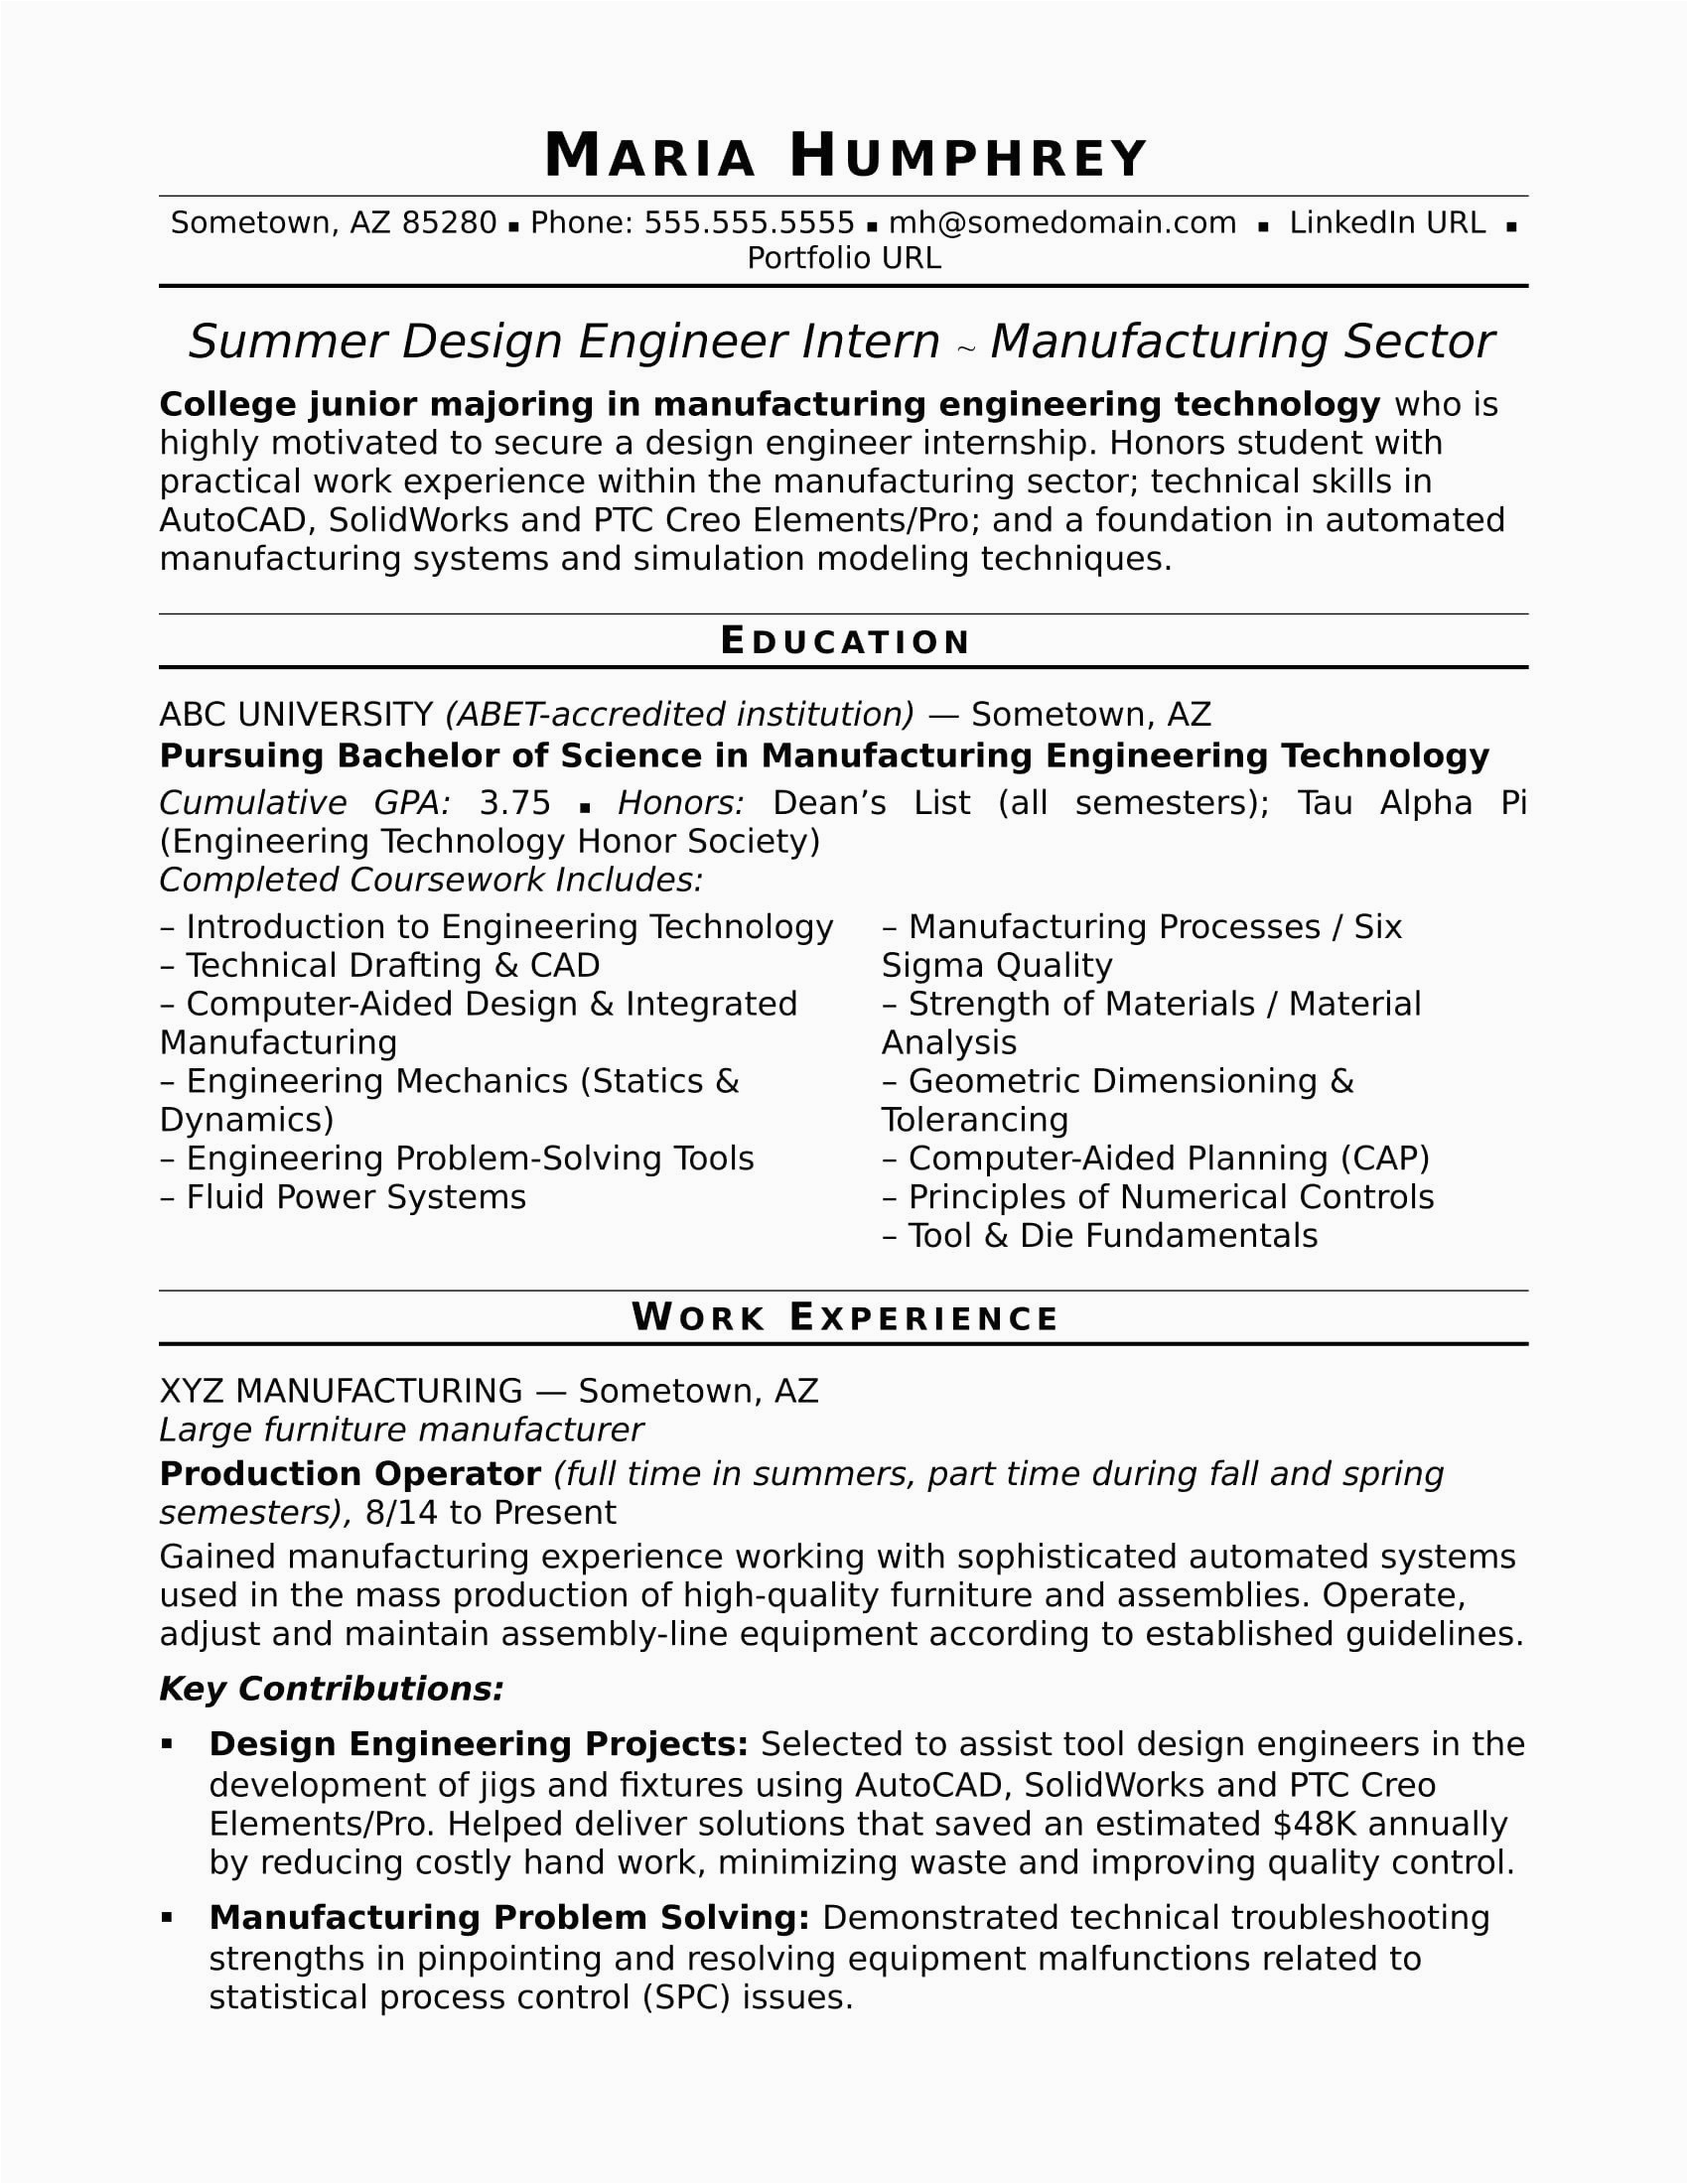 Experienced Mechanical Design Engineer Resume Sample Mechanical Design Engineering Resume Inspirational Sample Resume for An